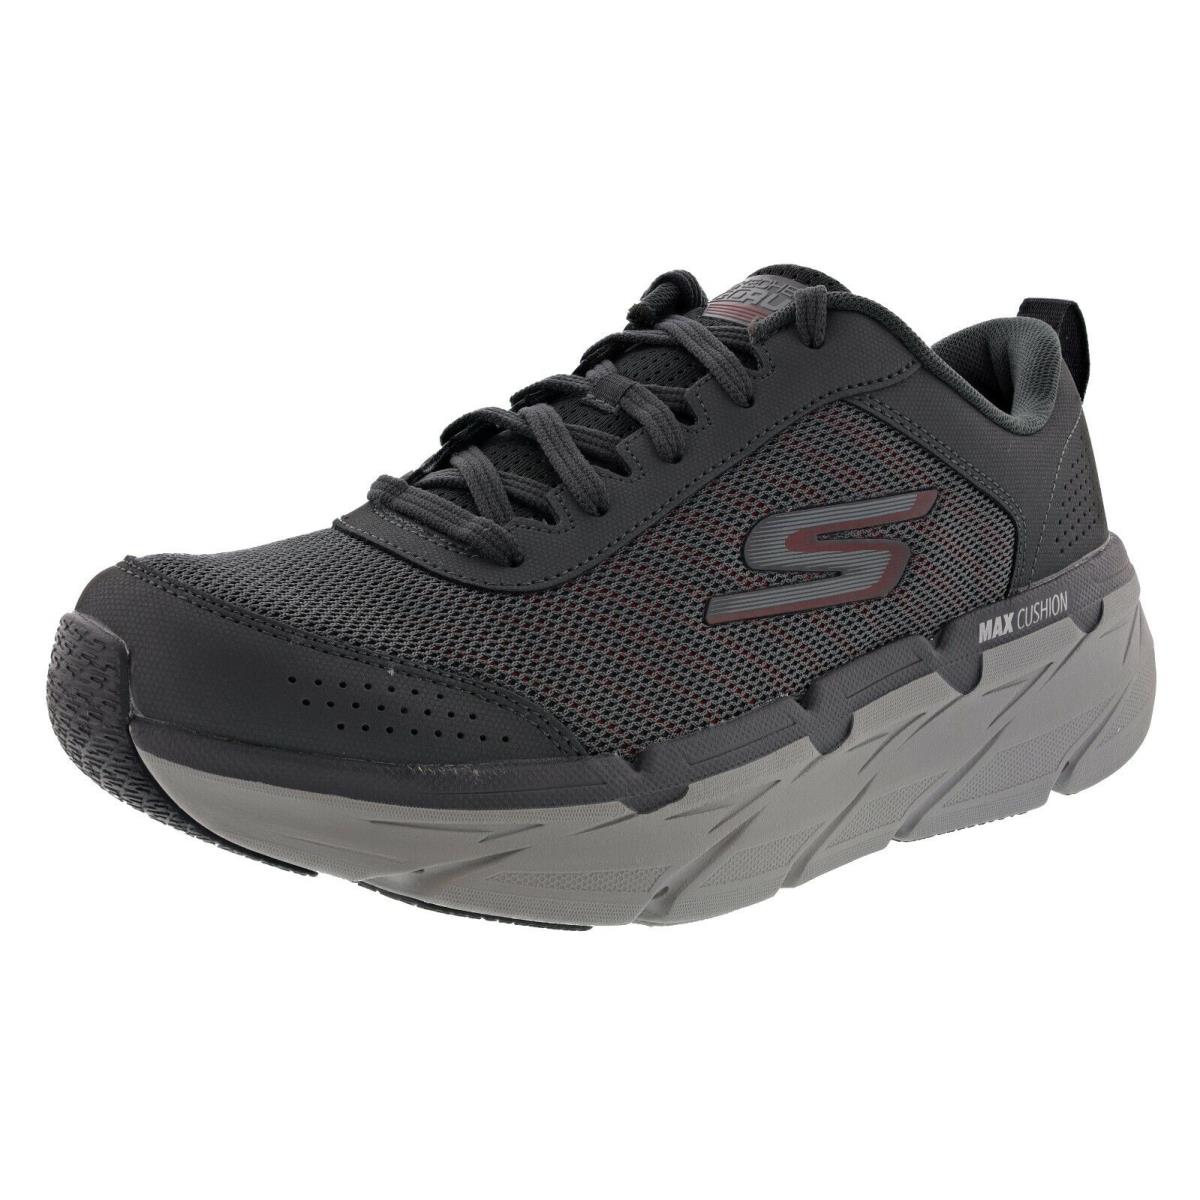 Skechers Men`s Max Cushioning Premier- Paragon 220078 Running Shoes CHARCOAL / RED